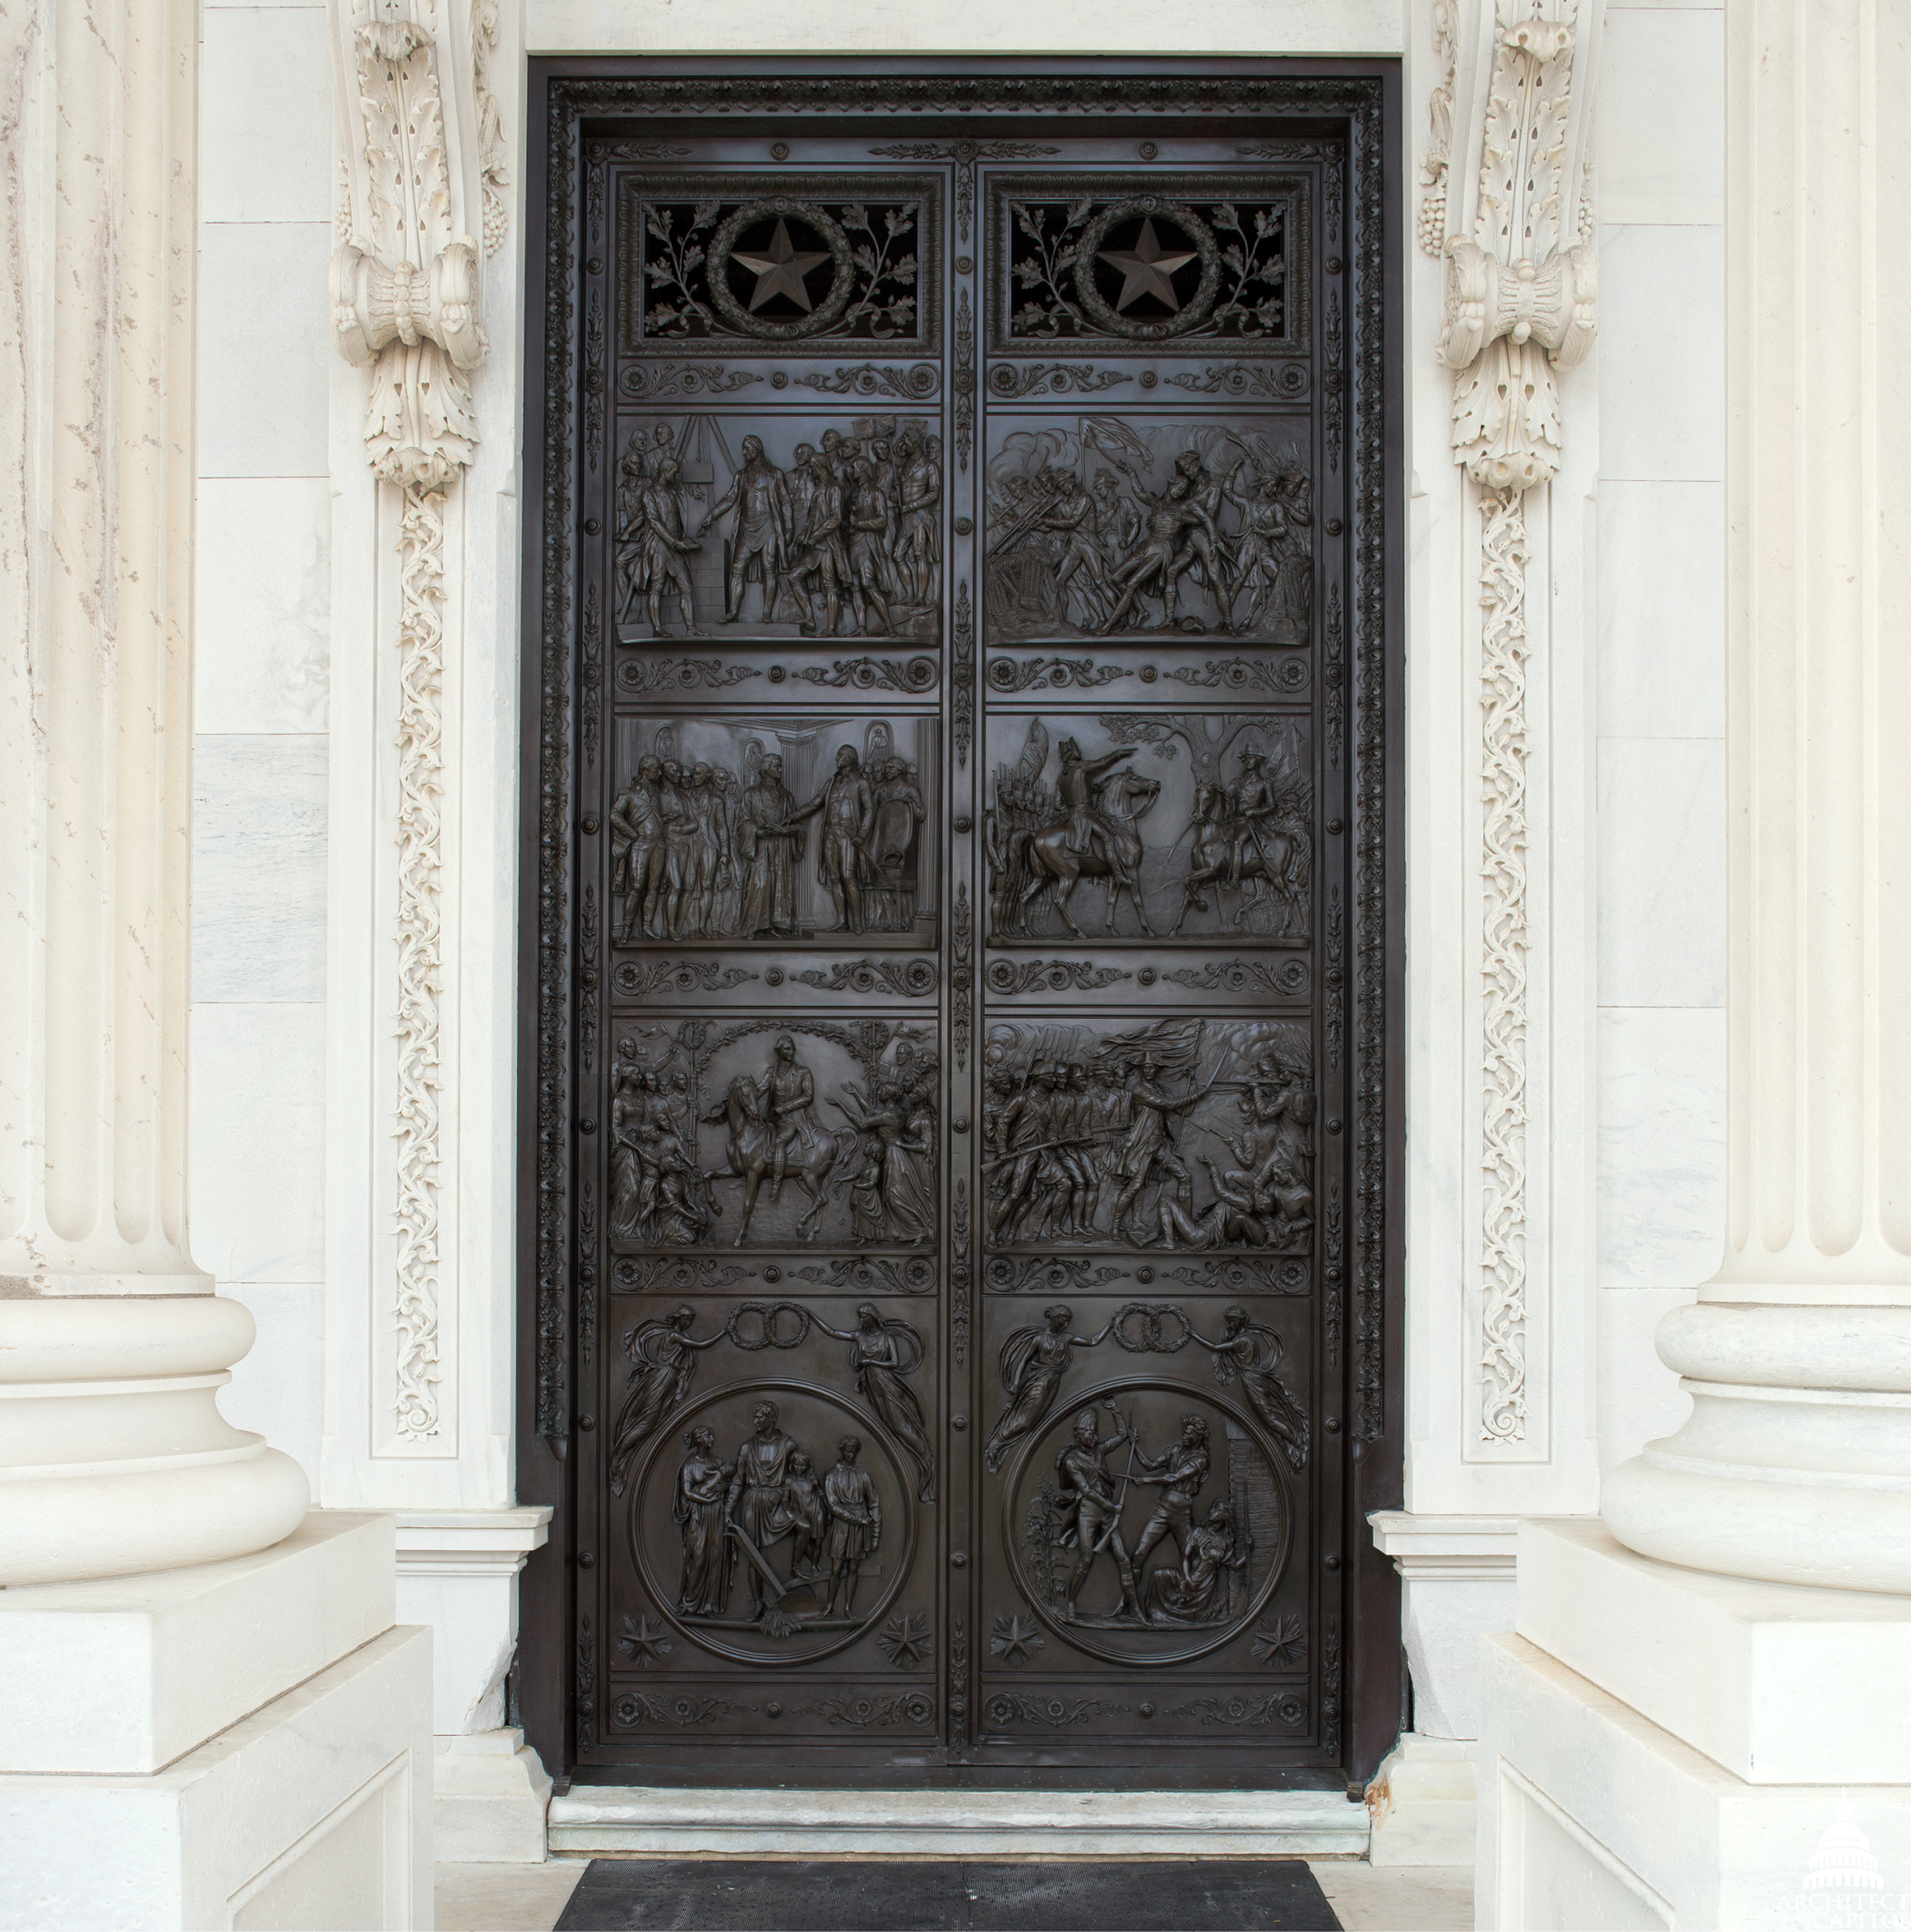 Senate Bronze Doors designed by Thomas Crawford located on the East Portico entrance of the U.S. Capitol Building.